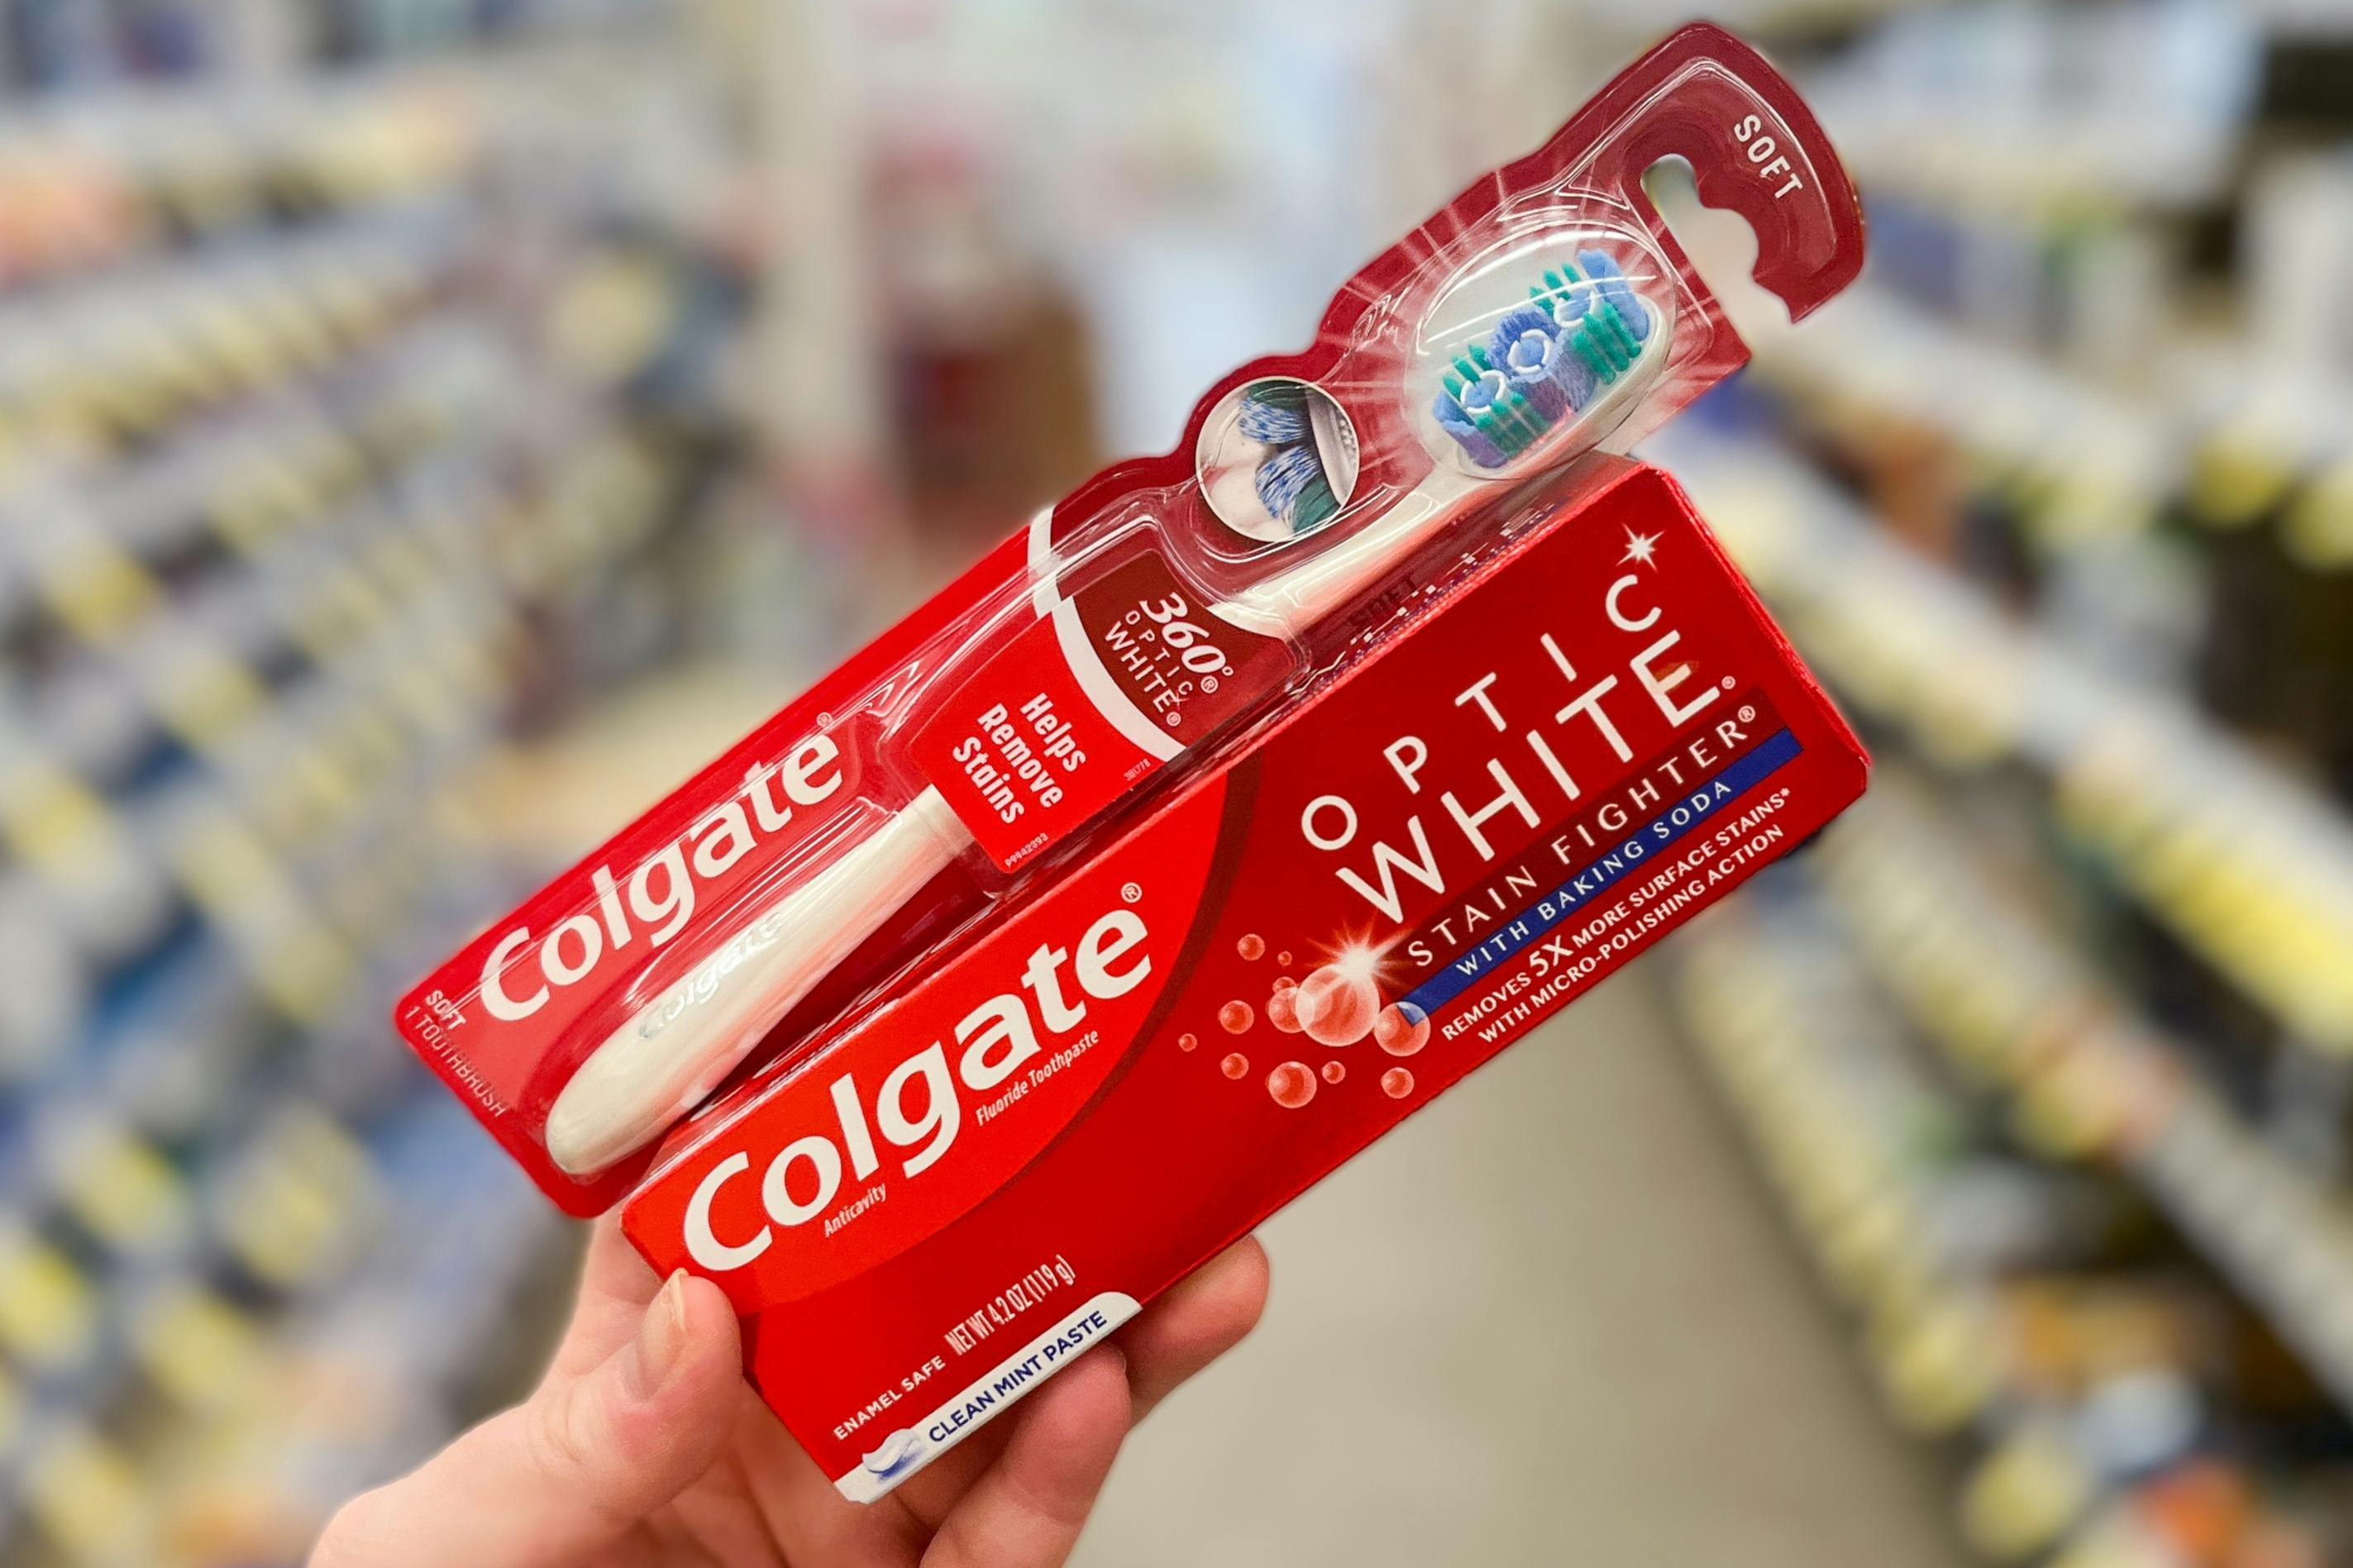 Colgate Products, Just $0.50 Each at Walgreens - The Krazy Coupon Lady